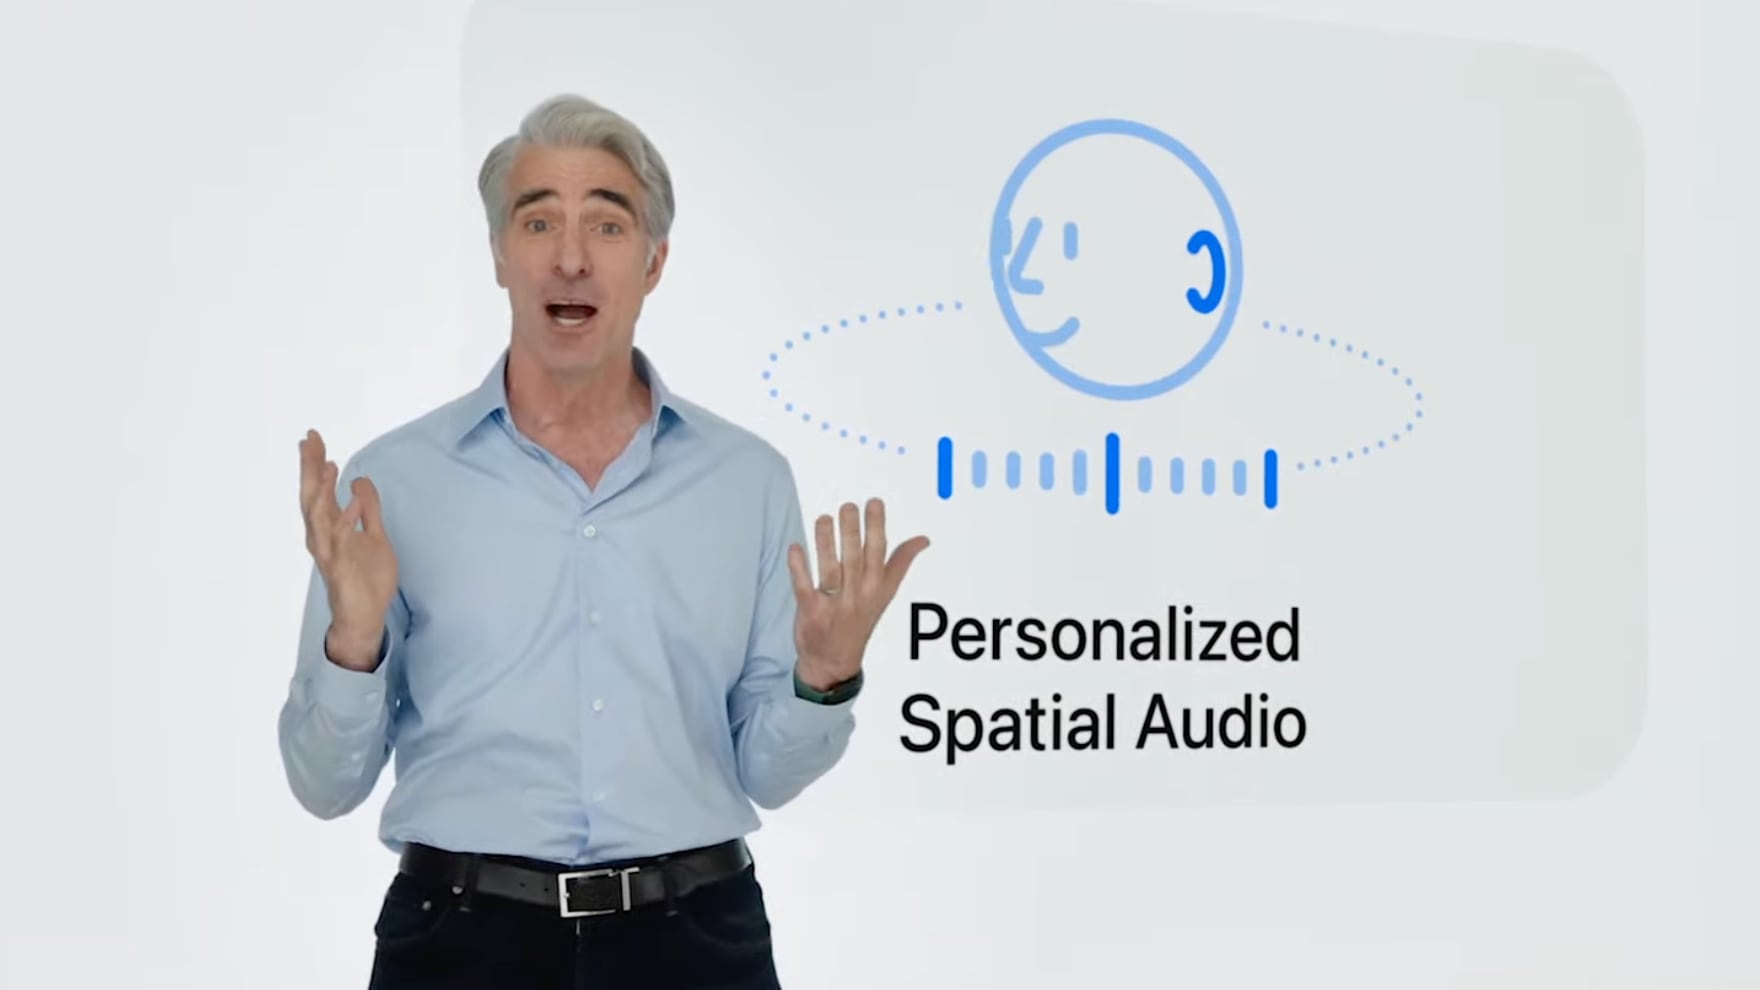 iOS 16 Brings New Personalized Spatial Audio Feature That Uses TrueDepth Camera